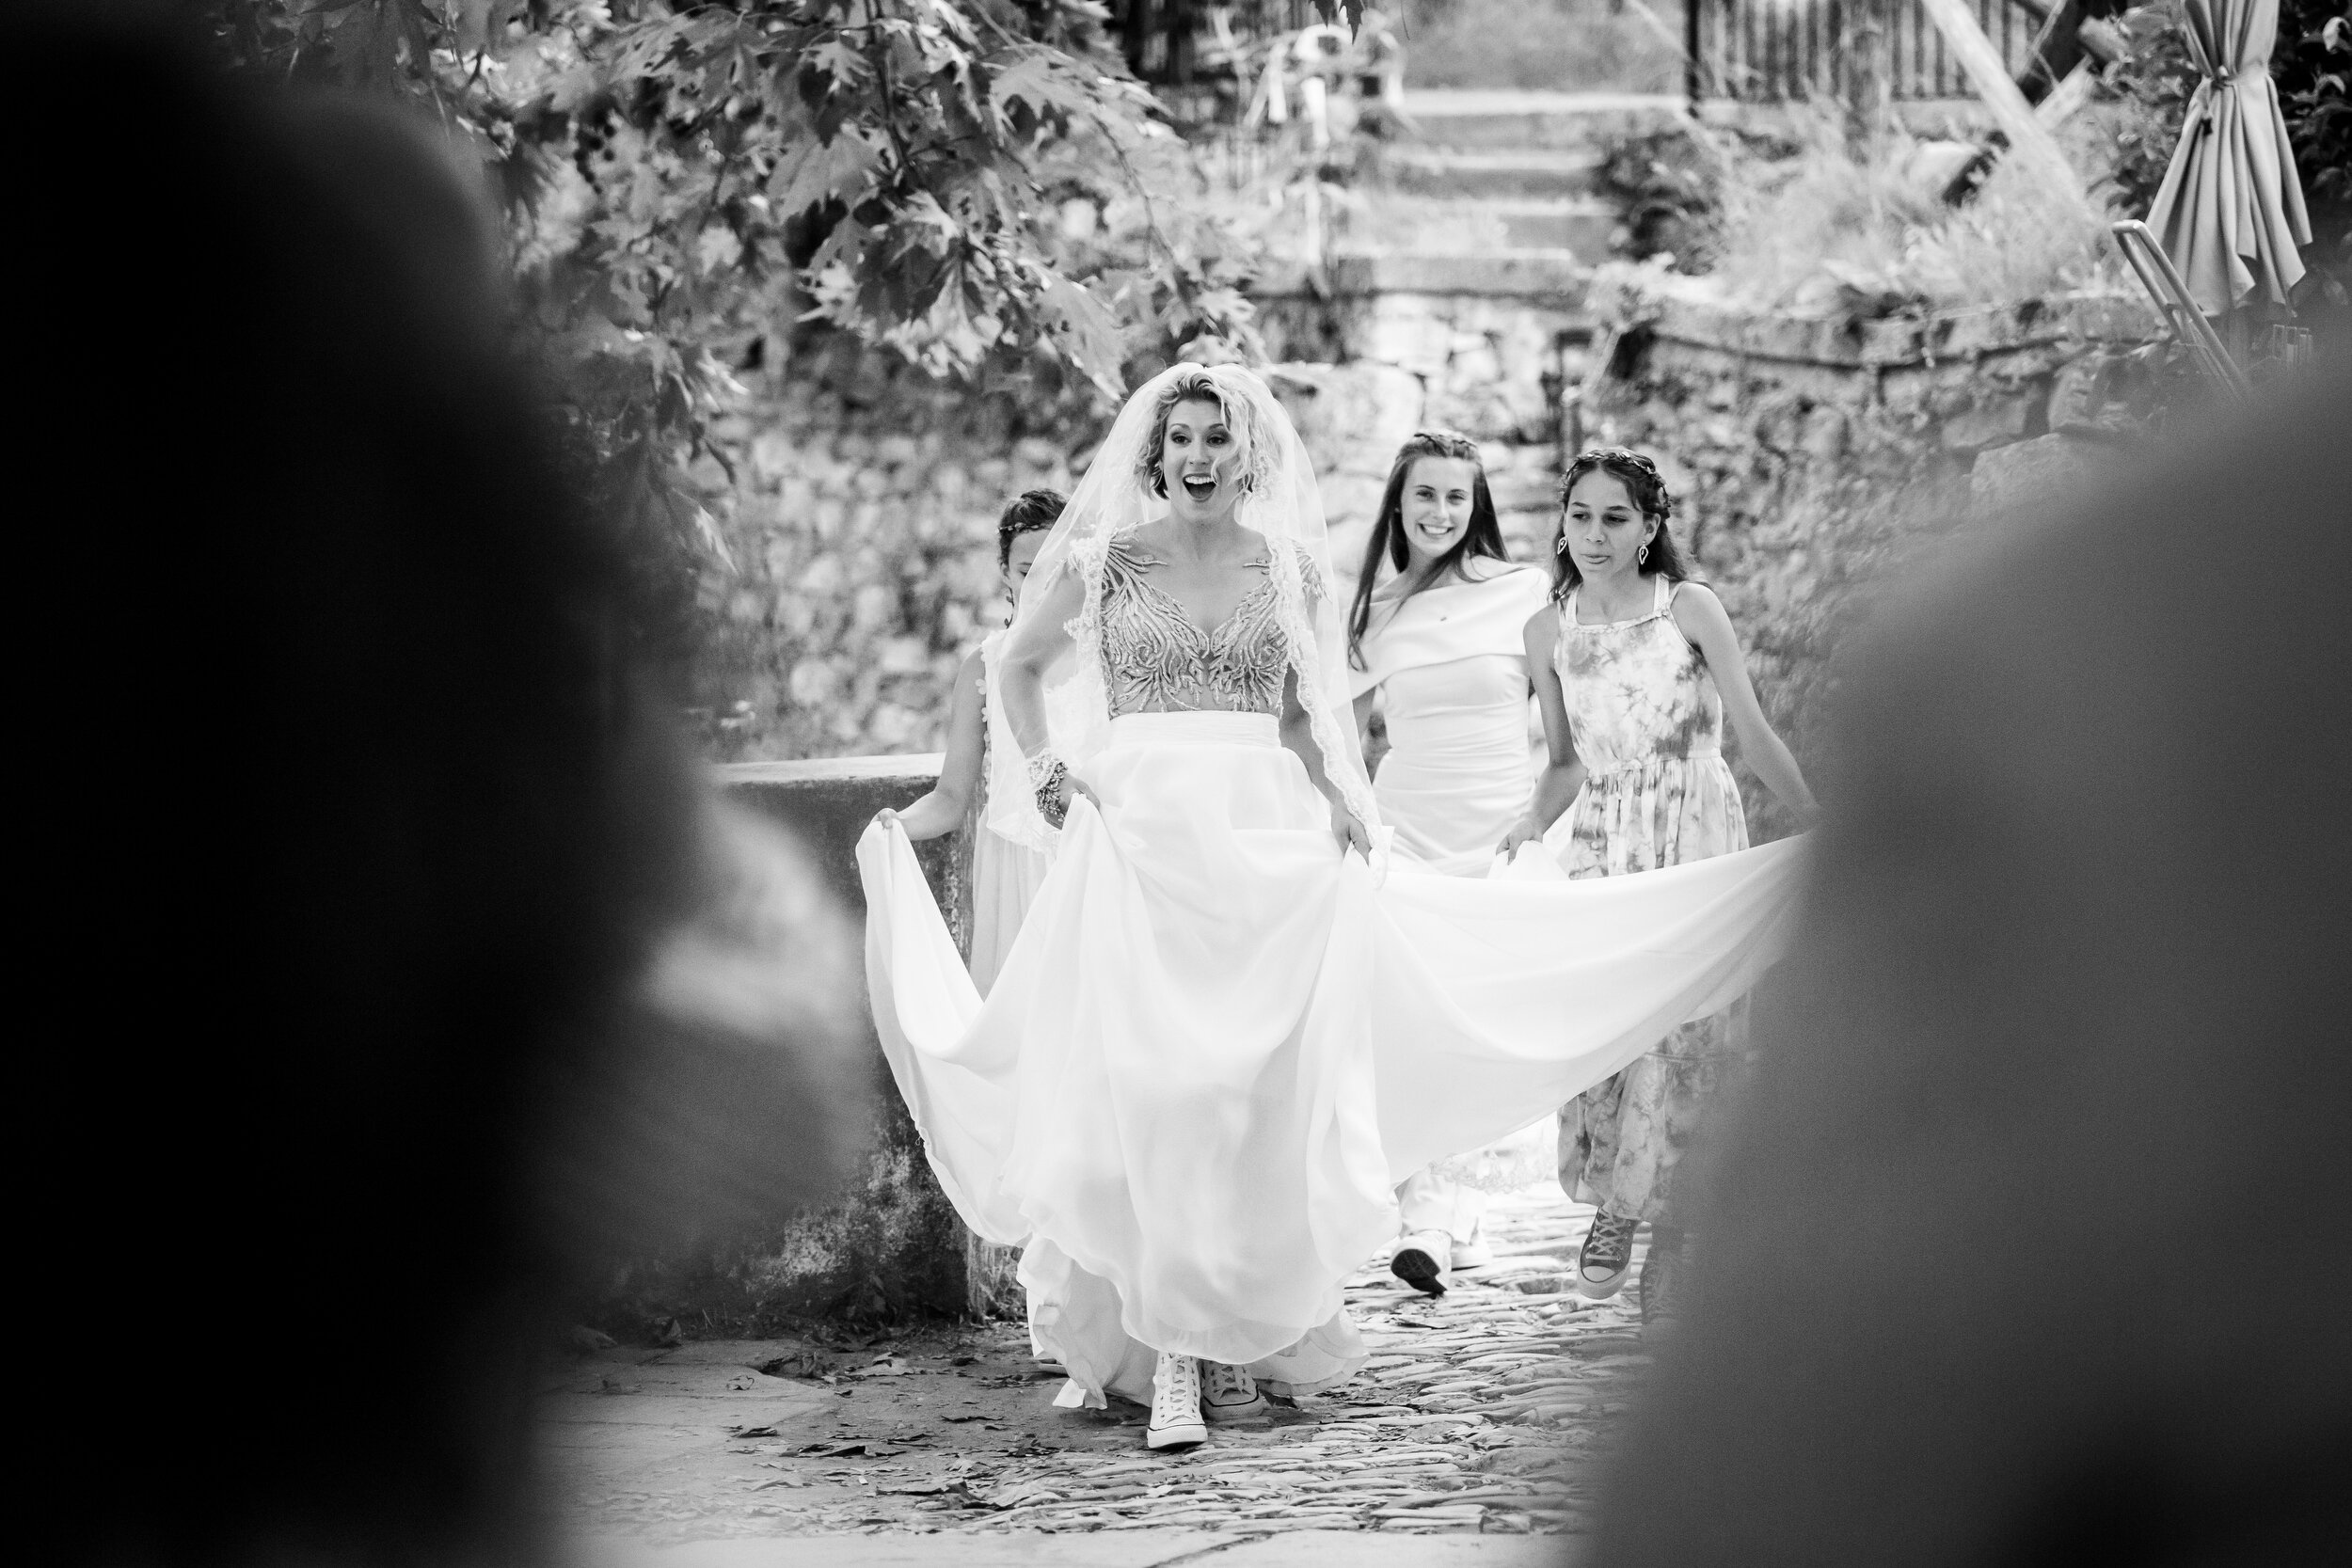 Bride reacts as she comes to the ceremony site on her wedding day:  destination wedding photo at the Lost Unicorn Hotel, Tsagarada, Greece by J. Brown Photography.